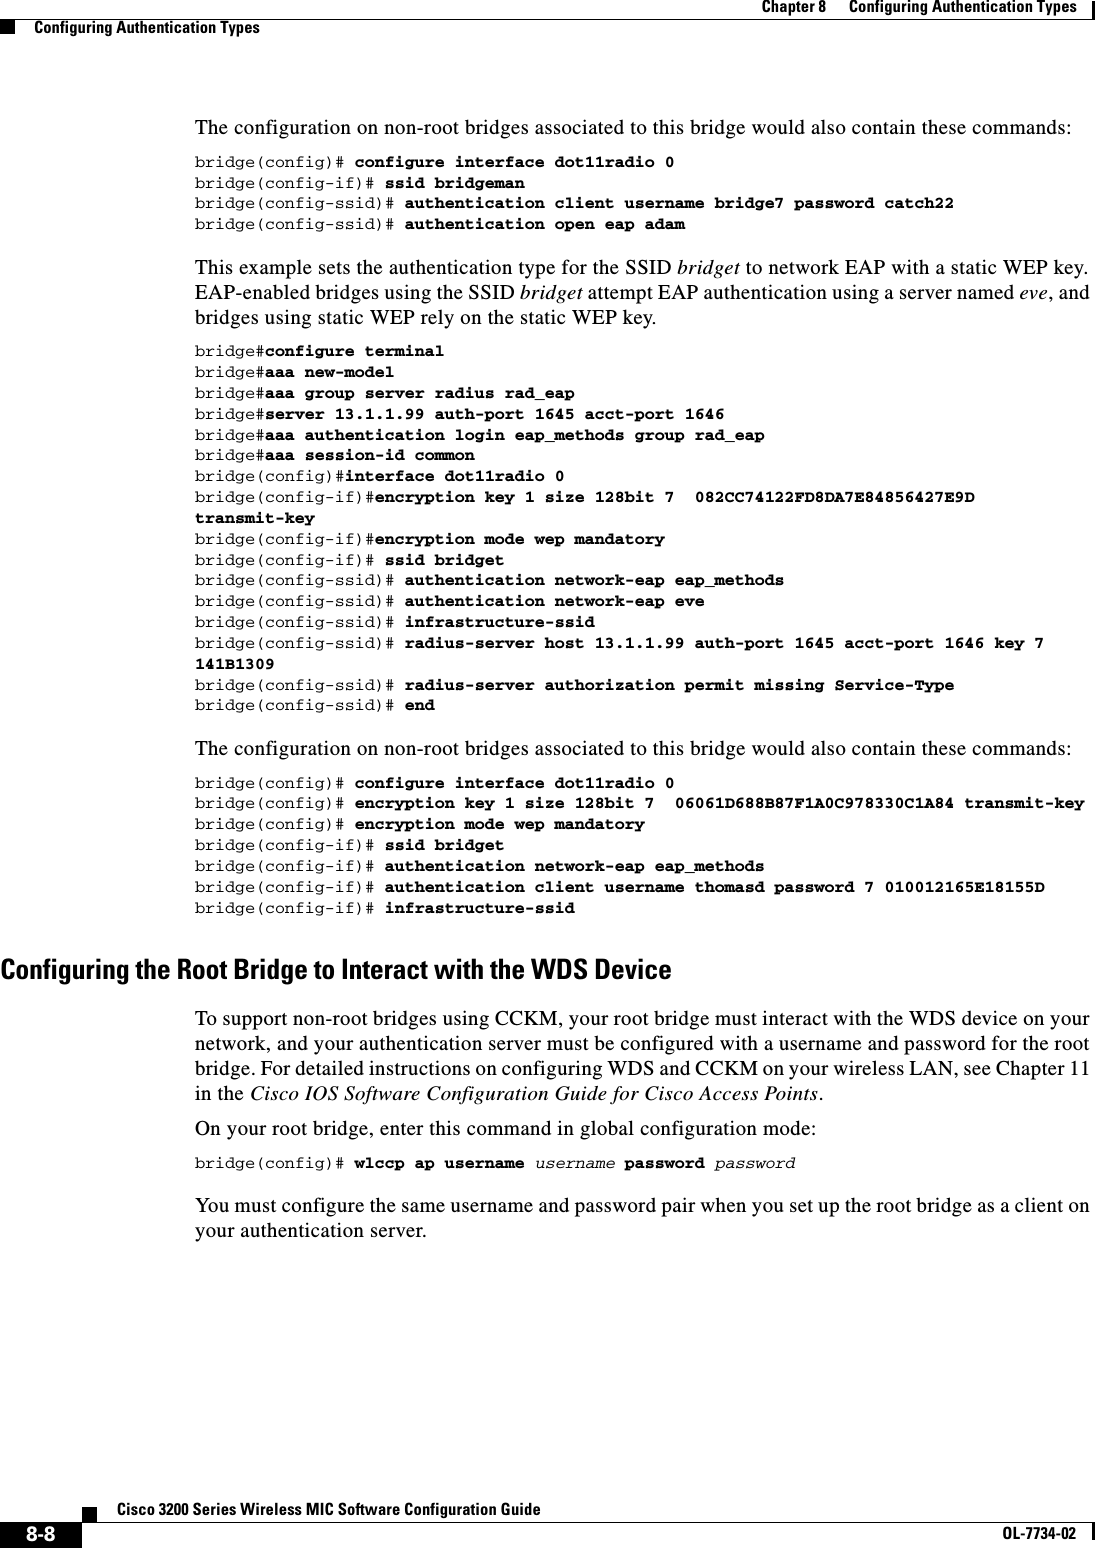 8-8Cisco 3200 Series Wireless MIC Software Configuration GuideOL-7734-02Chapter 8      Configuring Authentication TypesConfiguring Authentication TypesThe configuration on non-root bridges associated to this bridge would also contain these commands:bridge(config)# configure interface dot11radio 0bridge(config-if)# ssid bridgemanbridge(config-ssid)# authentication client username bridge7 password catch22bridge(config-ssid)# authentication open eap adamThis example sets the authentication type for the SSID bridget to network EAP with a static WEP key. EAP-enabled bridges using the SSID bridget attempt EAP authentication using a server named eve,and bridges using static WEP rely on the static WEP key.bridge#configure terminalbridge#aaa new-modelbridge#aaa group server radius rad_eapbridge#server 13.1.1.99 auth-port 1645 acct-port 1646bridge#aaa authentication login eap_methods group rad_eapbridge#aaa session-id commonbridge(config)#interface dot11radio 0bridge(config-if)#encryption key 1 size 128bit 7  082CC74122FD8DA7E84856427E9D transmit-keybridge(config-if)#encryption mode wep mandatorybridge(config-if)# ssid bridgetbridge(config-ssid)# authentication network-eap eap_methodsbridge(config-ssid)# authentication network-eap evebridge(config-ssid)# infrastructure-ssidbridge(config-ssid)# radius-server host 13.1.1.99 auth-port 1645 acct-port 1646 key 7 141B1309bridge(config-ssid)# radius-server authorization permit missing Service-Typebridge(config-ssid)# endThe configuration on non-root bridges associated to this bridge would also contain these commands:bridge(config)# configure interface dot11radio 0bridge(config)# encryption key 1 size 128bit 7  06061D688B87F1A0C978330C1A84 transmit-keybridge(config)# encryption mode wep mandatorybridge(config-if)# ssid bridgetbridge(config-if)# authentication network-eap eap_methodsbridge(config-if)# authentication client username thomasd password 7 010012165E18155Dbridge(config-if)# infrastructure-ssidConfiguring the Root Bridge to Interact with the WDS DeviceTo support non-root bridges using CCKM, your root bridge must interact with the WDS device on your network, and your authentication server must be configured with a username and password for the root bridge. For detailed instructions on configuring WDS and CCKM on your wireless LAN, see Chapter 11 in the Cisco IOS Software Configuration Guide for Cisco Access Points.On your root bridge, enter this command in global configuration mode:bridge(config)# wlccp ap username username password passwordYou must configure the same username and password pair when you set up the root bridge as a client on your authentication server.